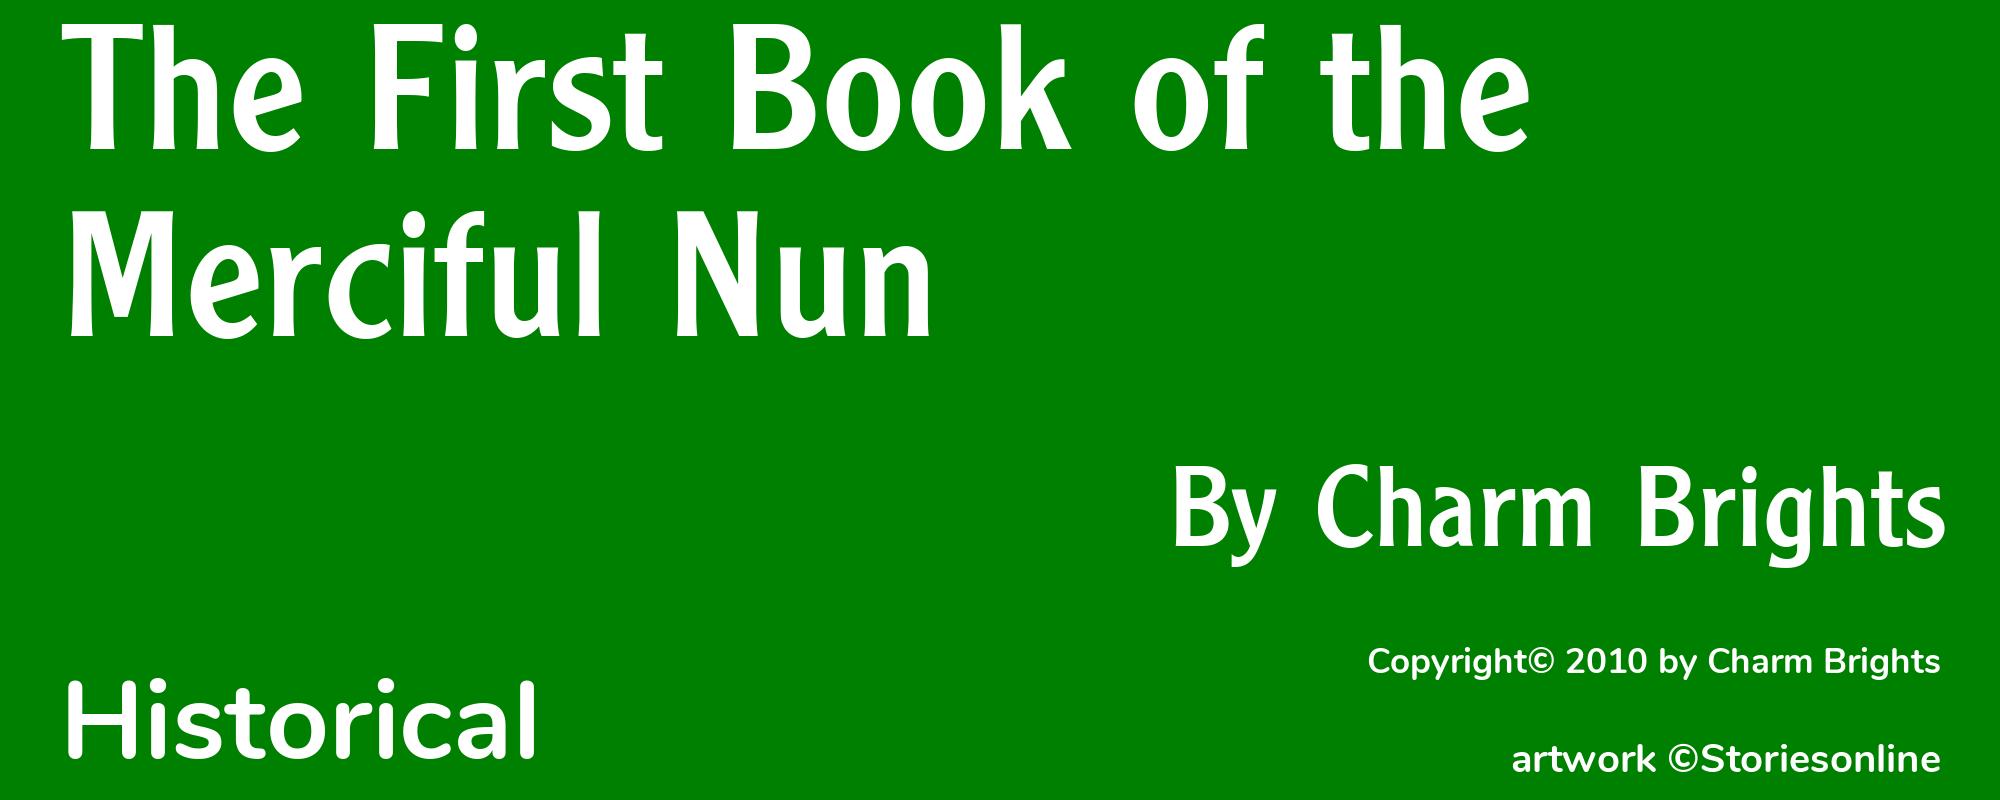 The First Book of the Merciful Nun - Cover